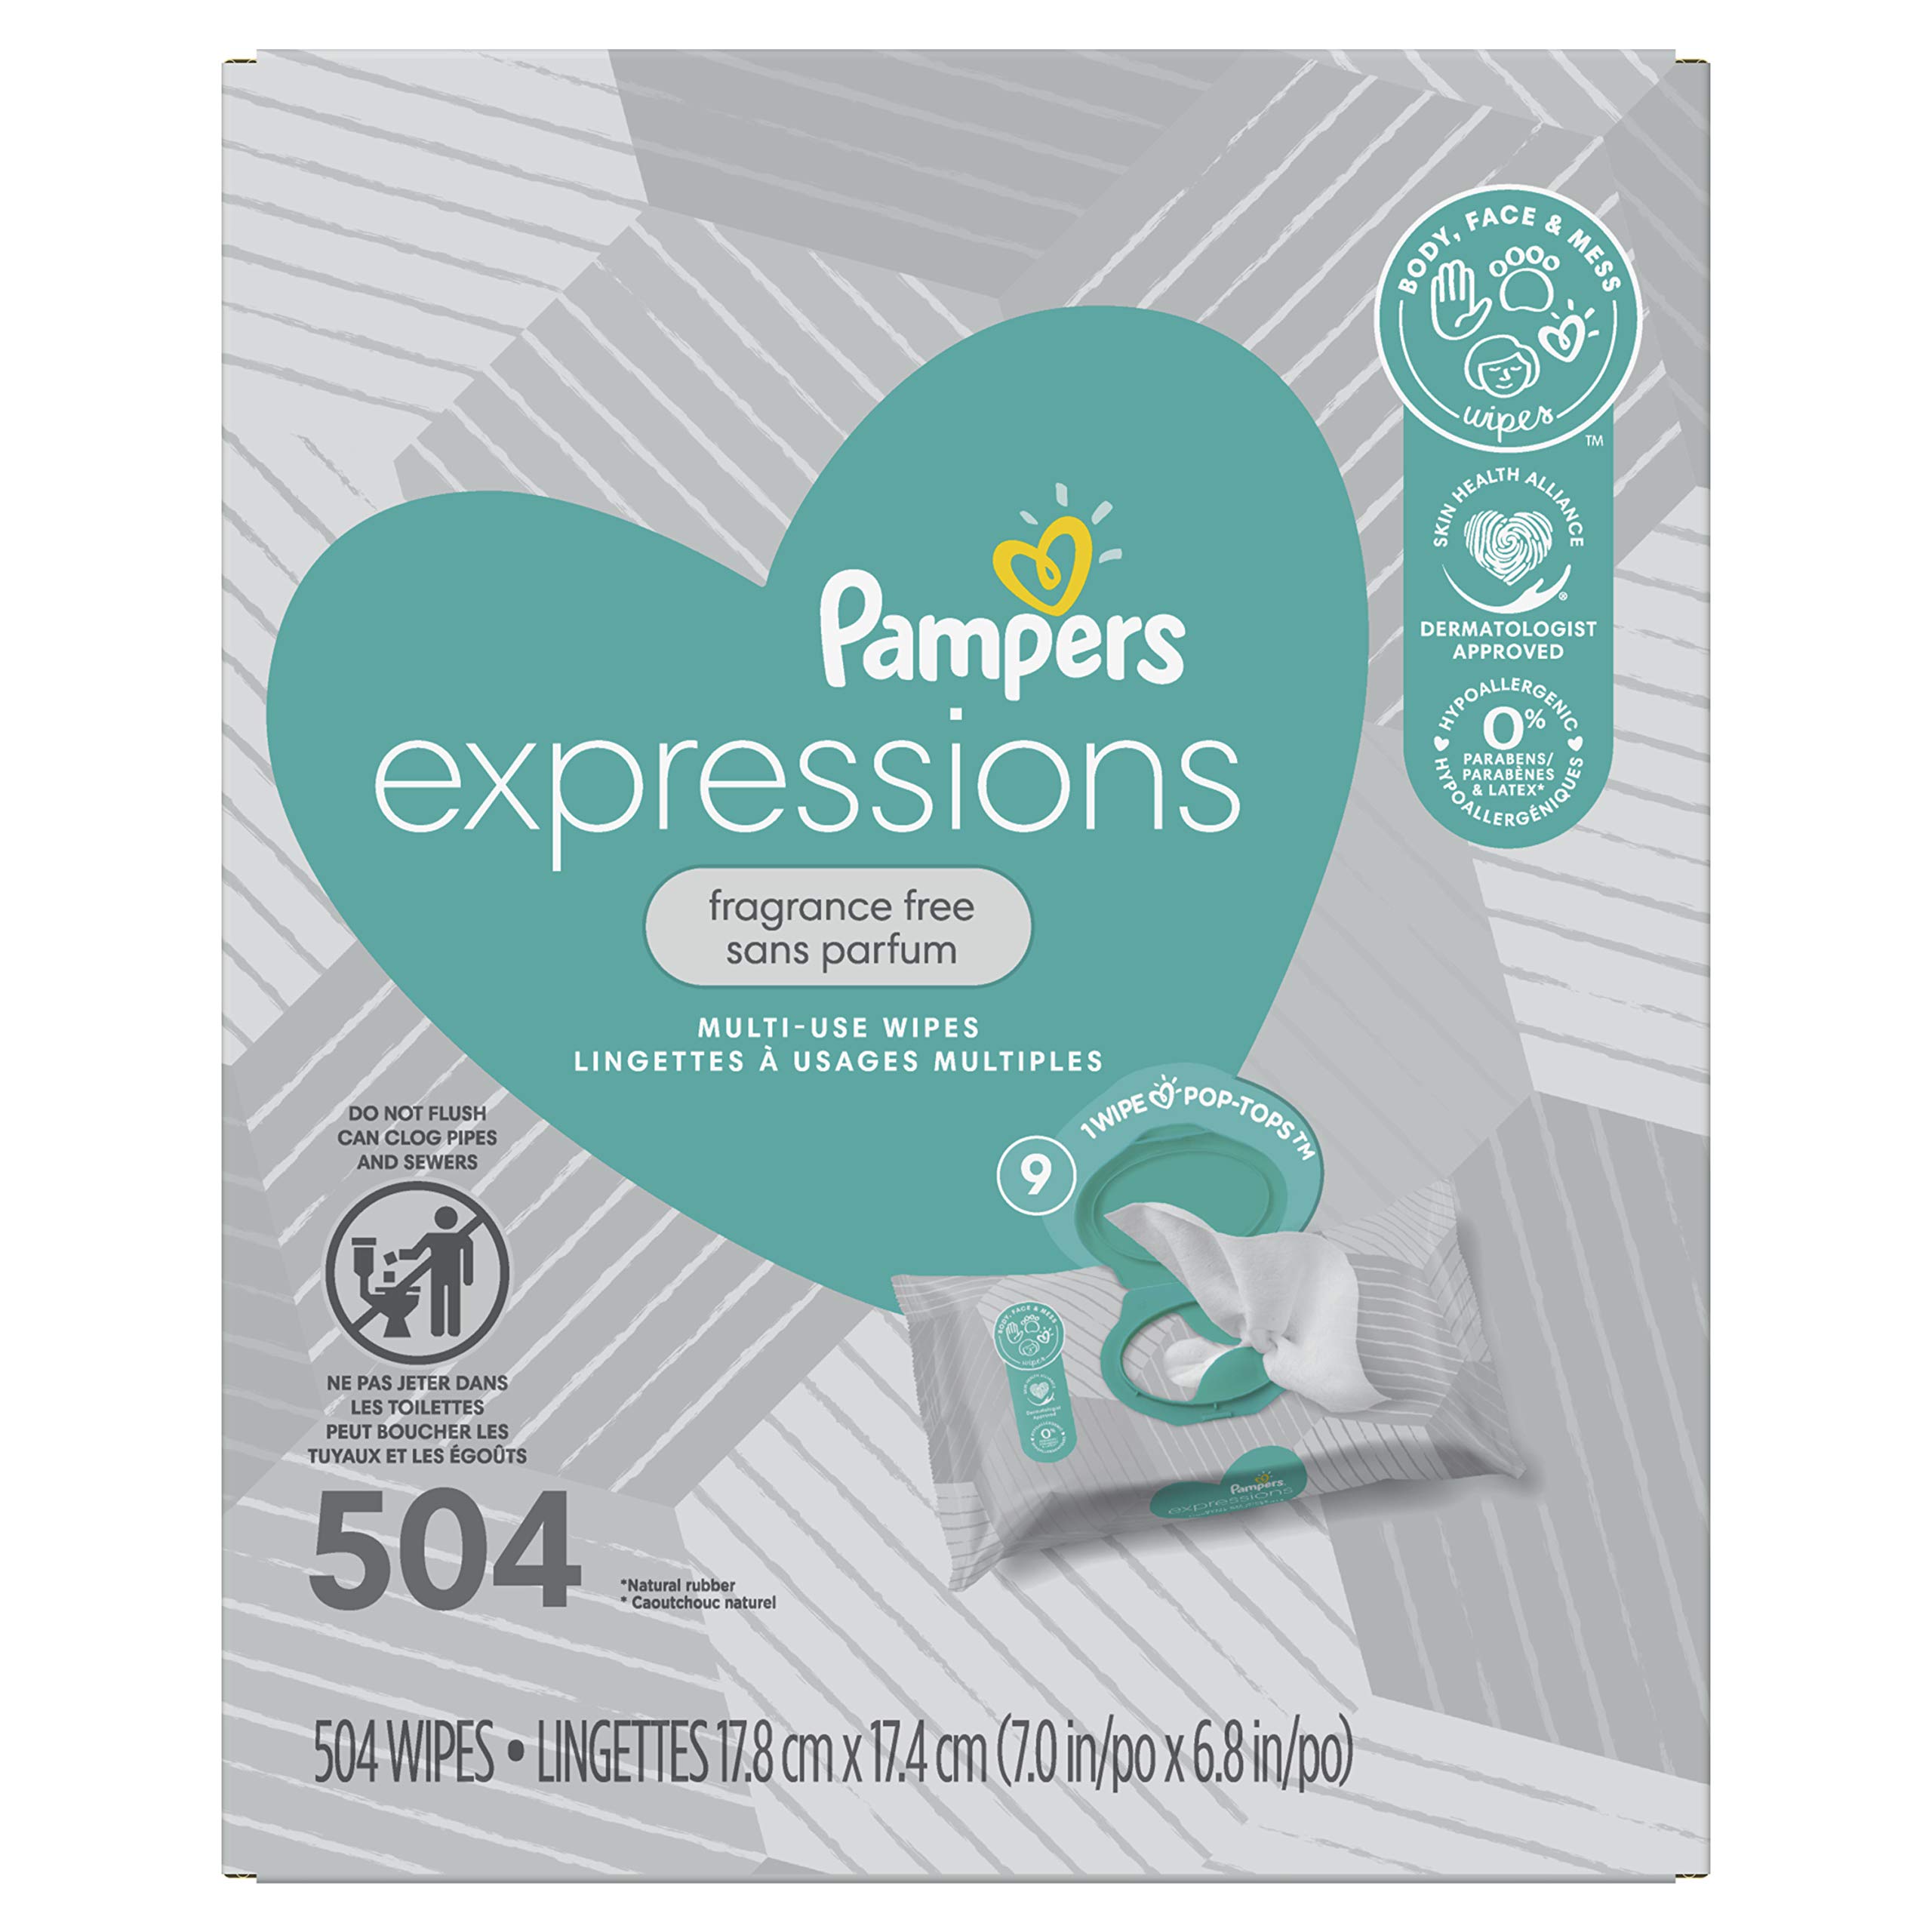 Pampers Baby Wipes Multi-Use Fragrance Free 9X Pop-Top Packs 504 Count